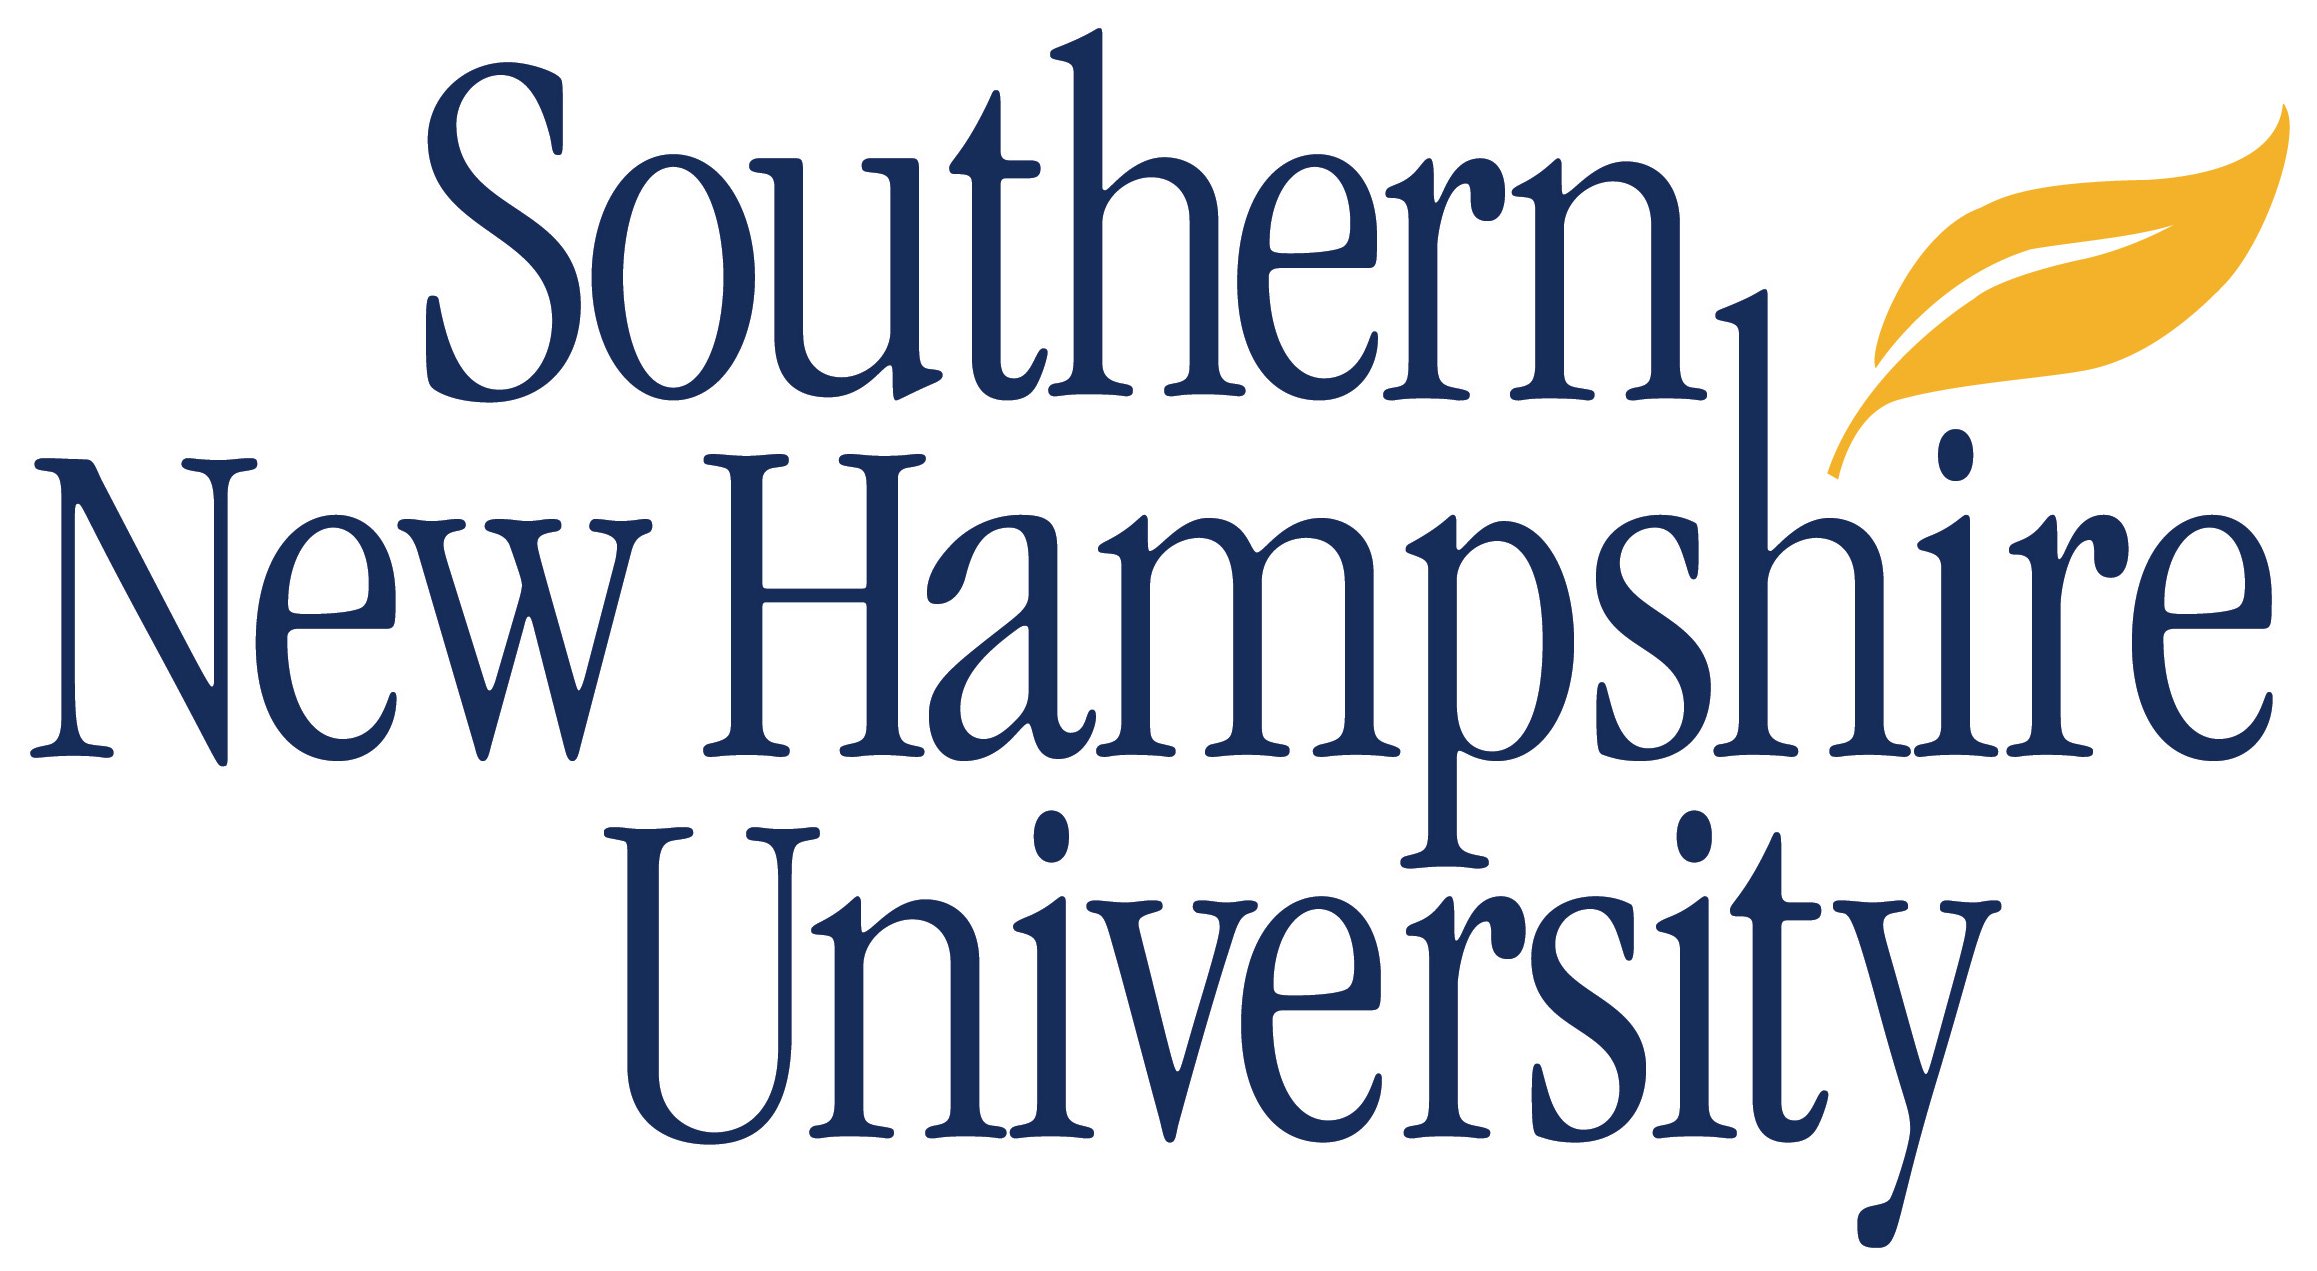 Southern New Hampshire University: Online Student Reviews